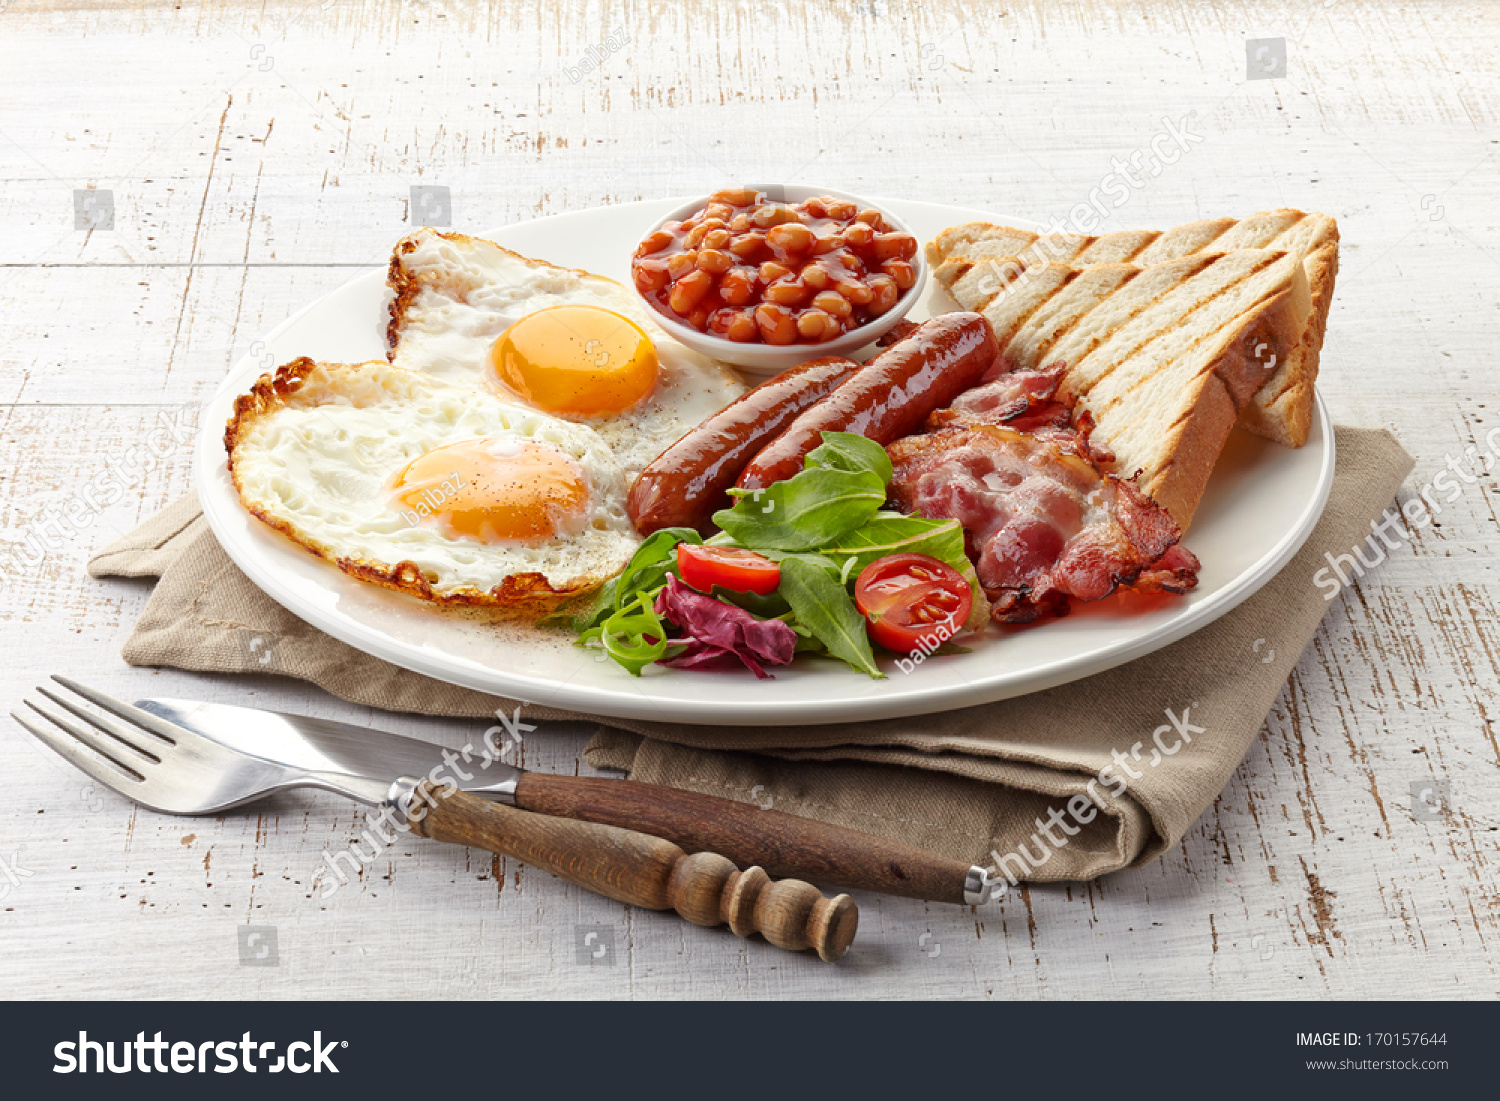 English breakfast with fried eggs, bacon, sausages, beans, toasts and fresh salad #170157644